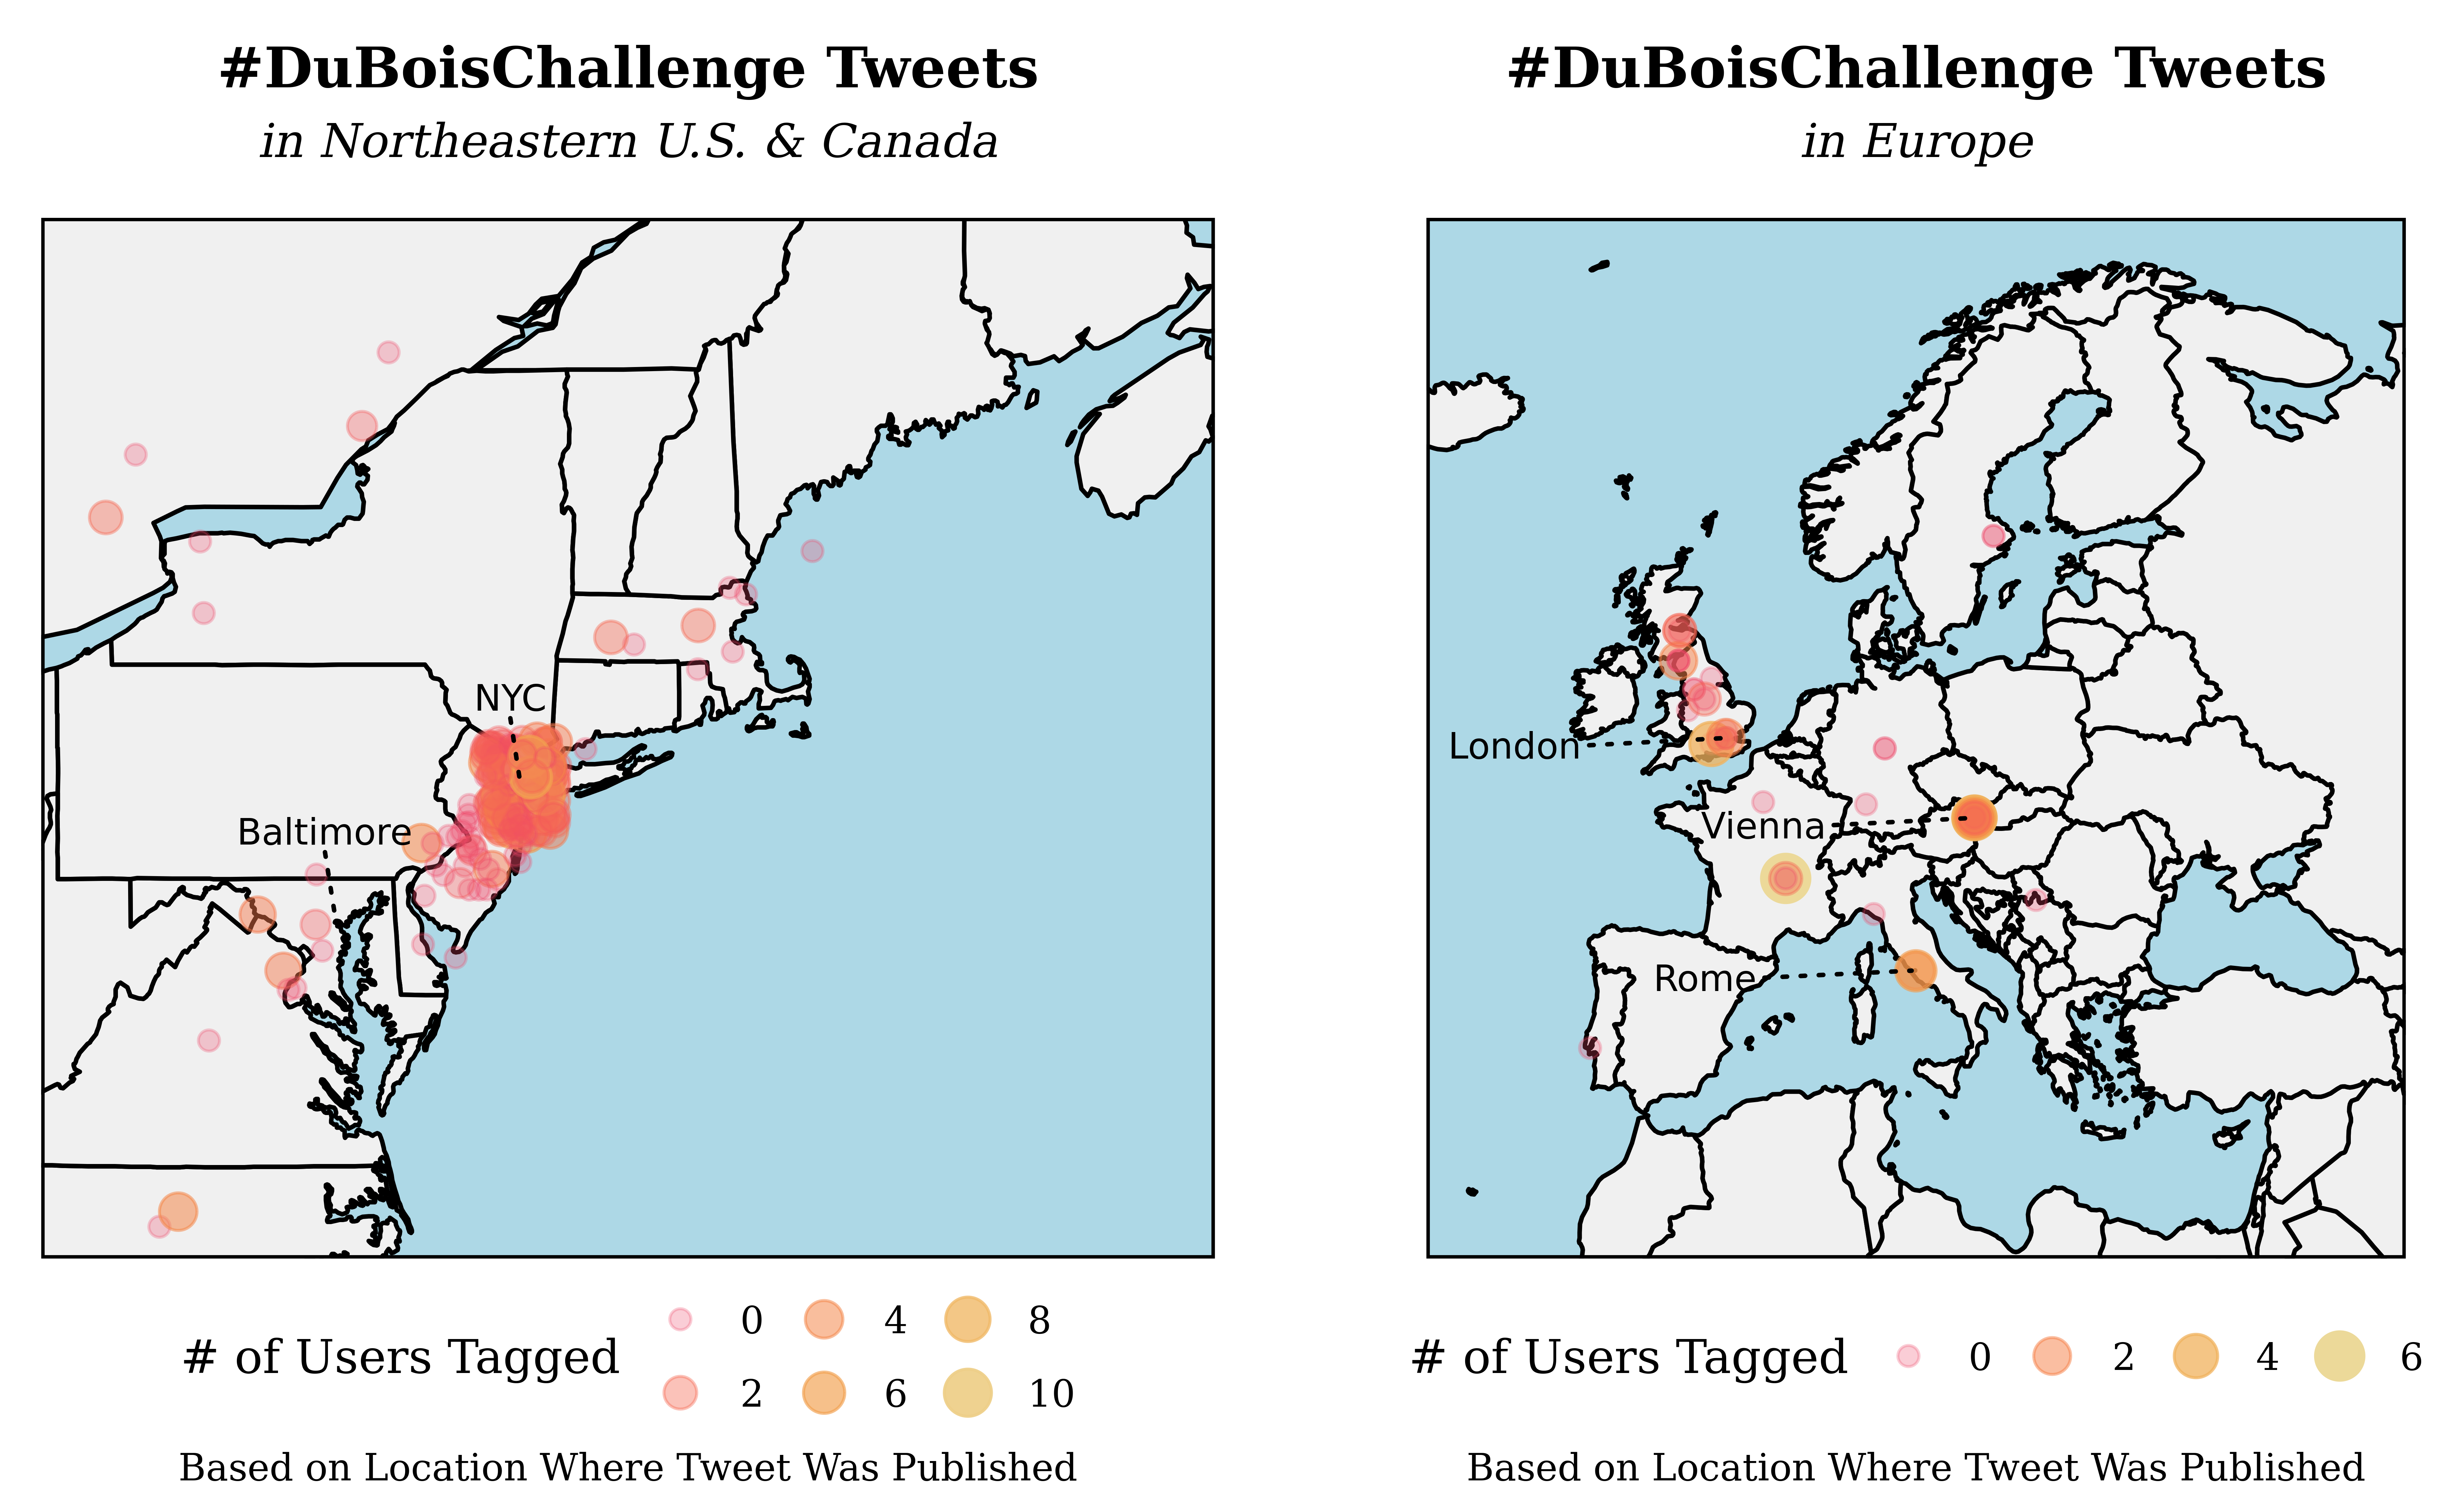 Twitter Trends from the #DuBoisChallenge comparingNorthern US & Canada and Europe.